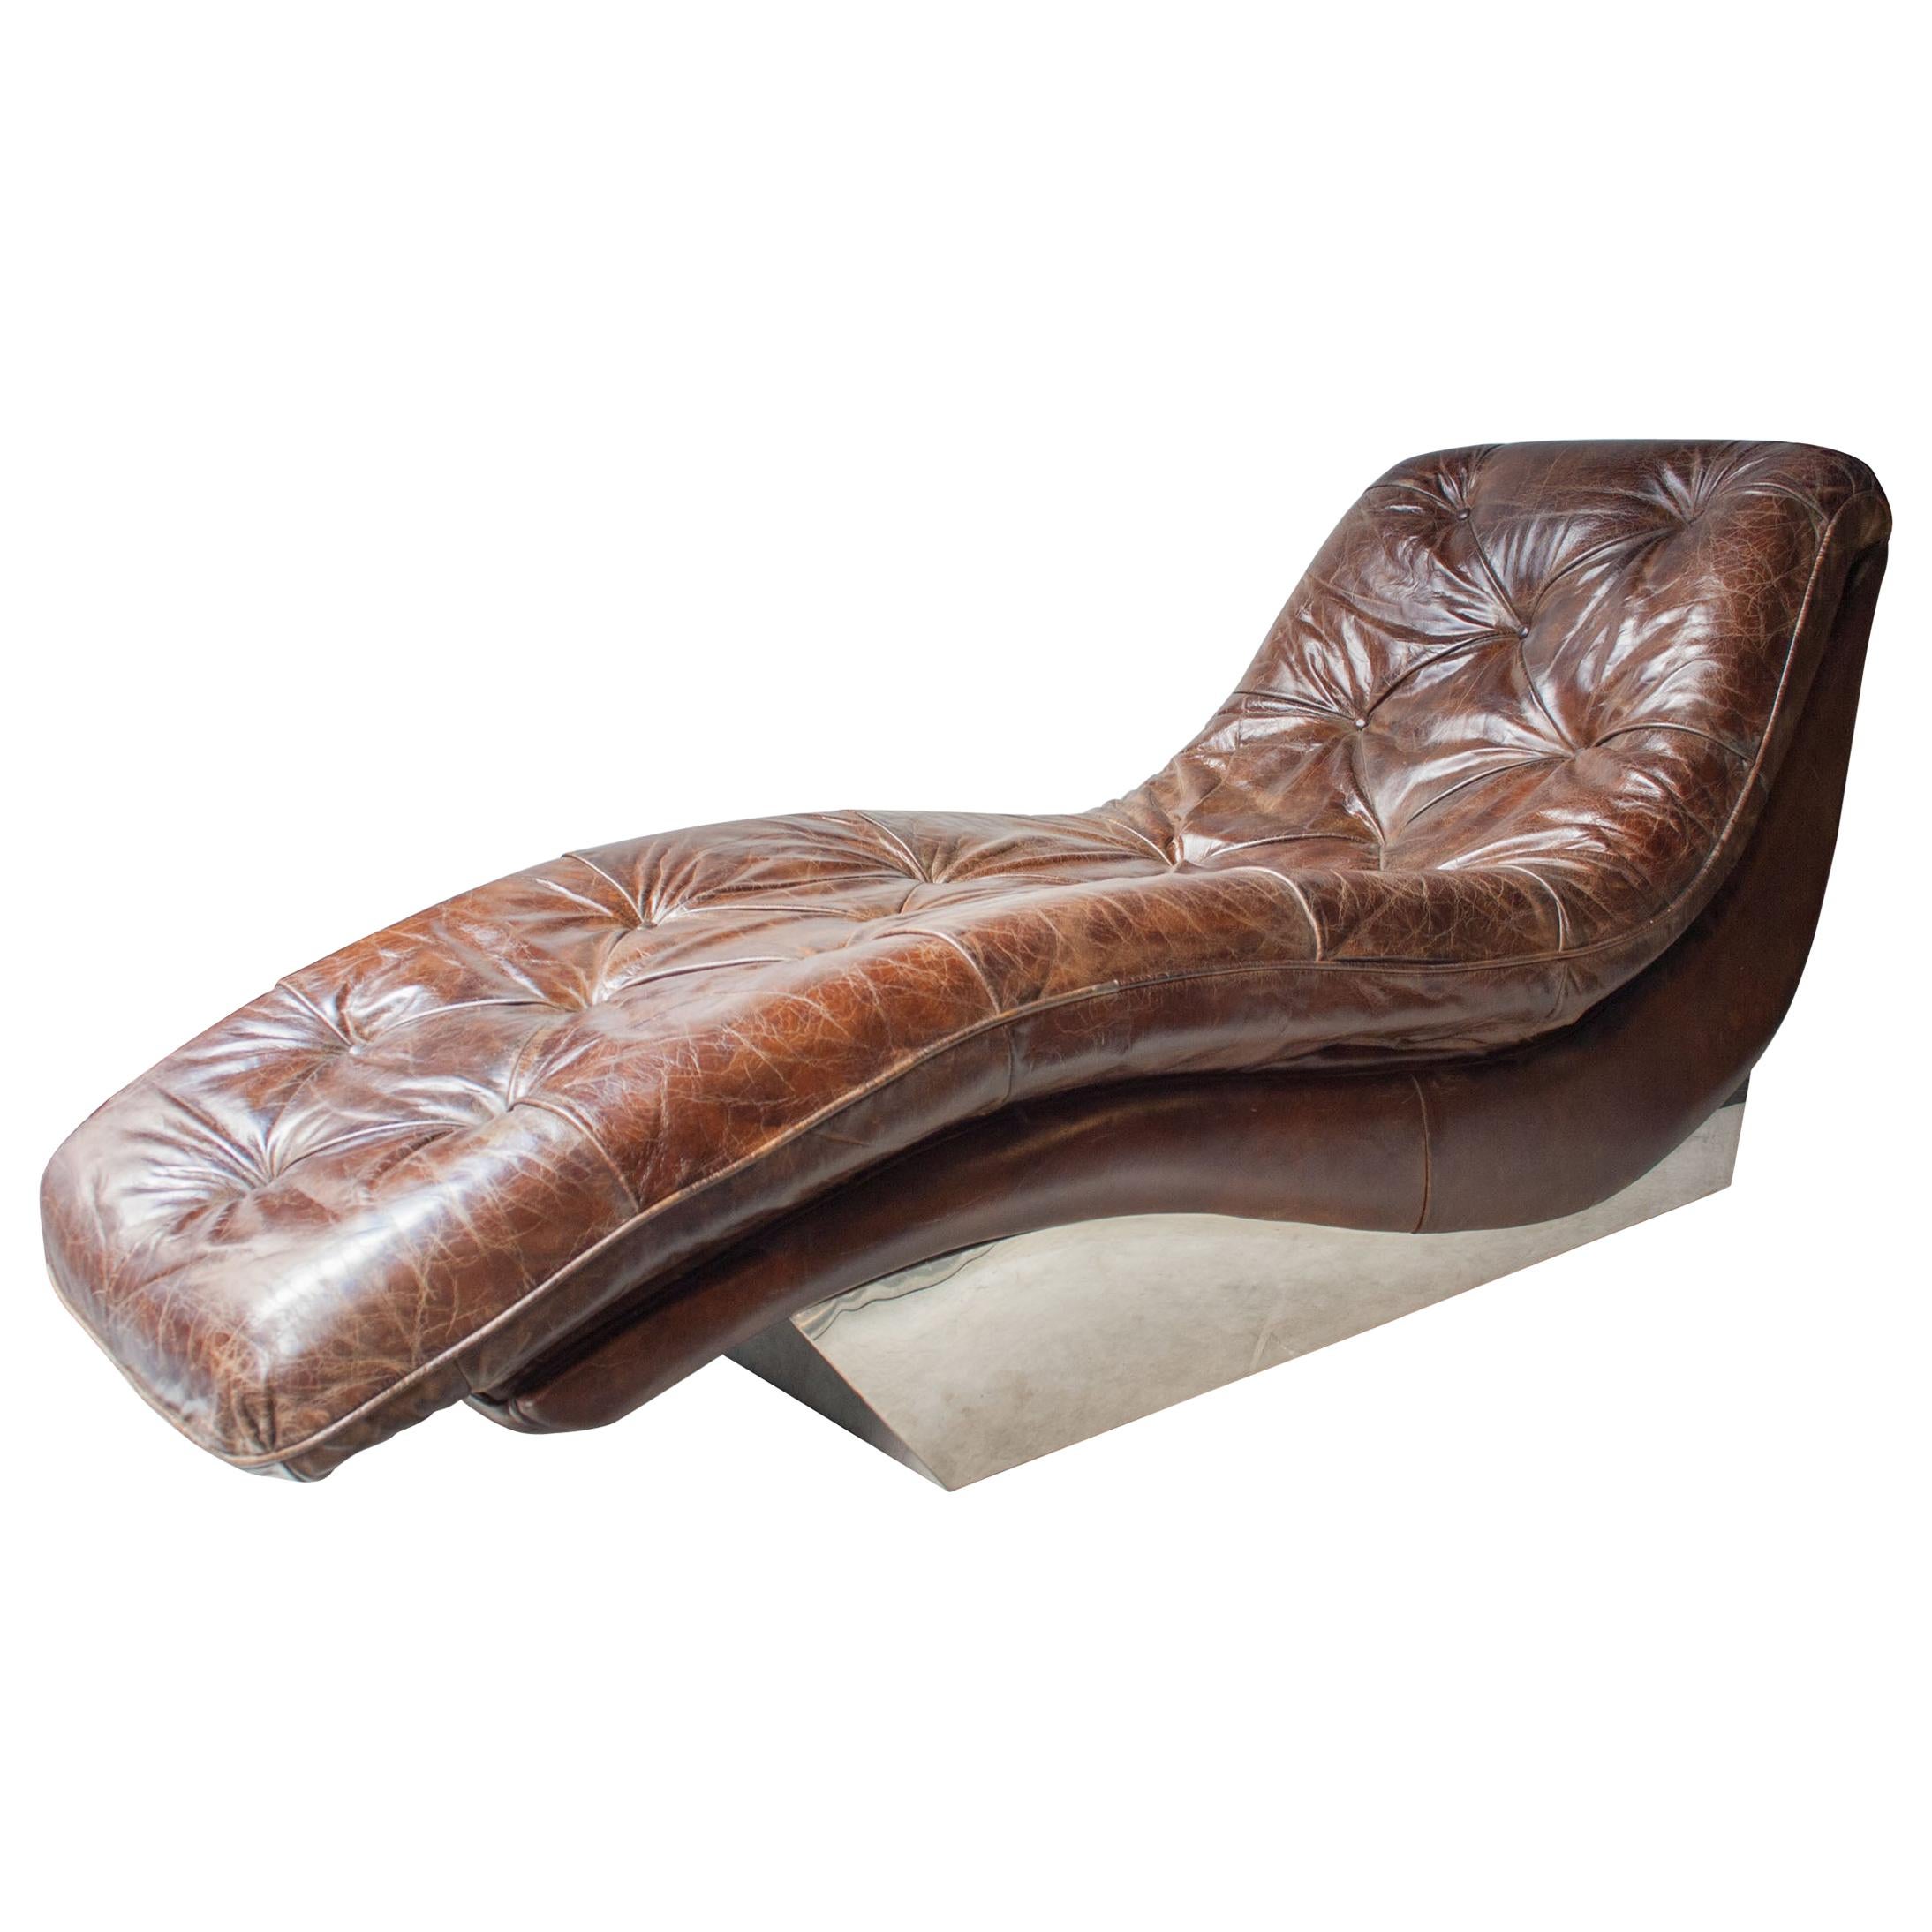 Midcentury Rectangular Brown Chromed Capitone Leather English Chaise Lounge 1970